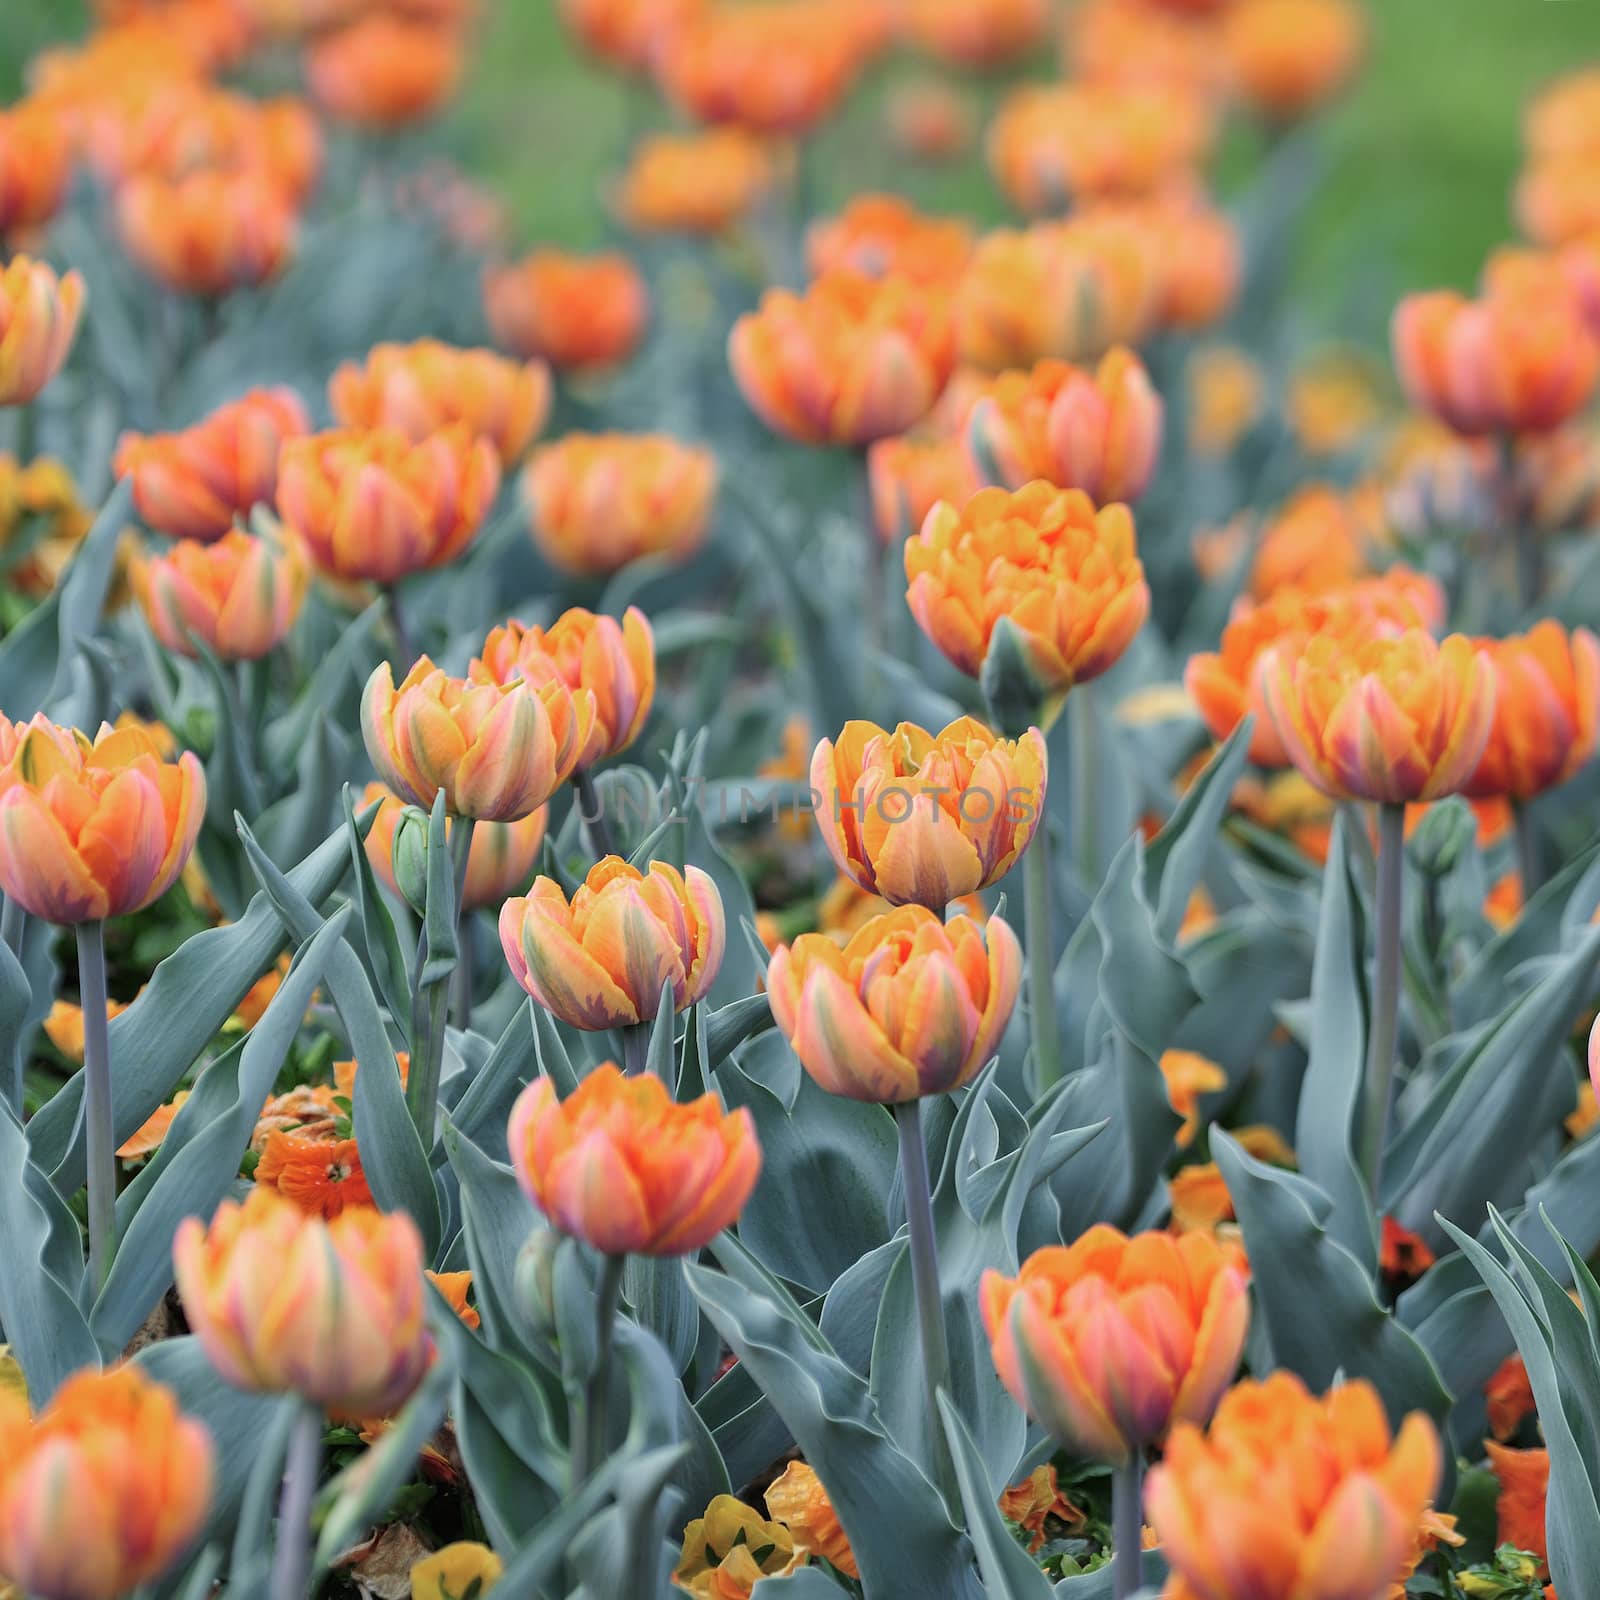 A double-late tulip or “peony” tulip, as they are often called, Orange Princess represents perfection among its kind.